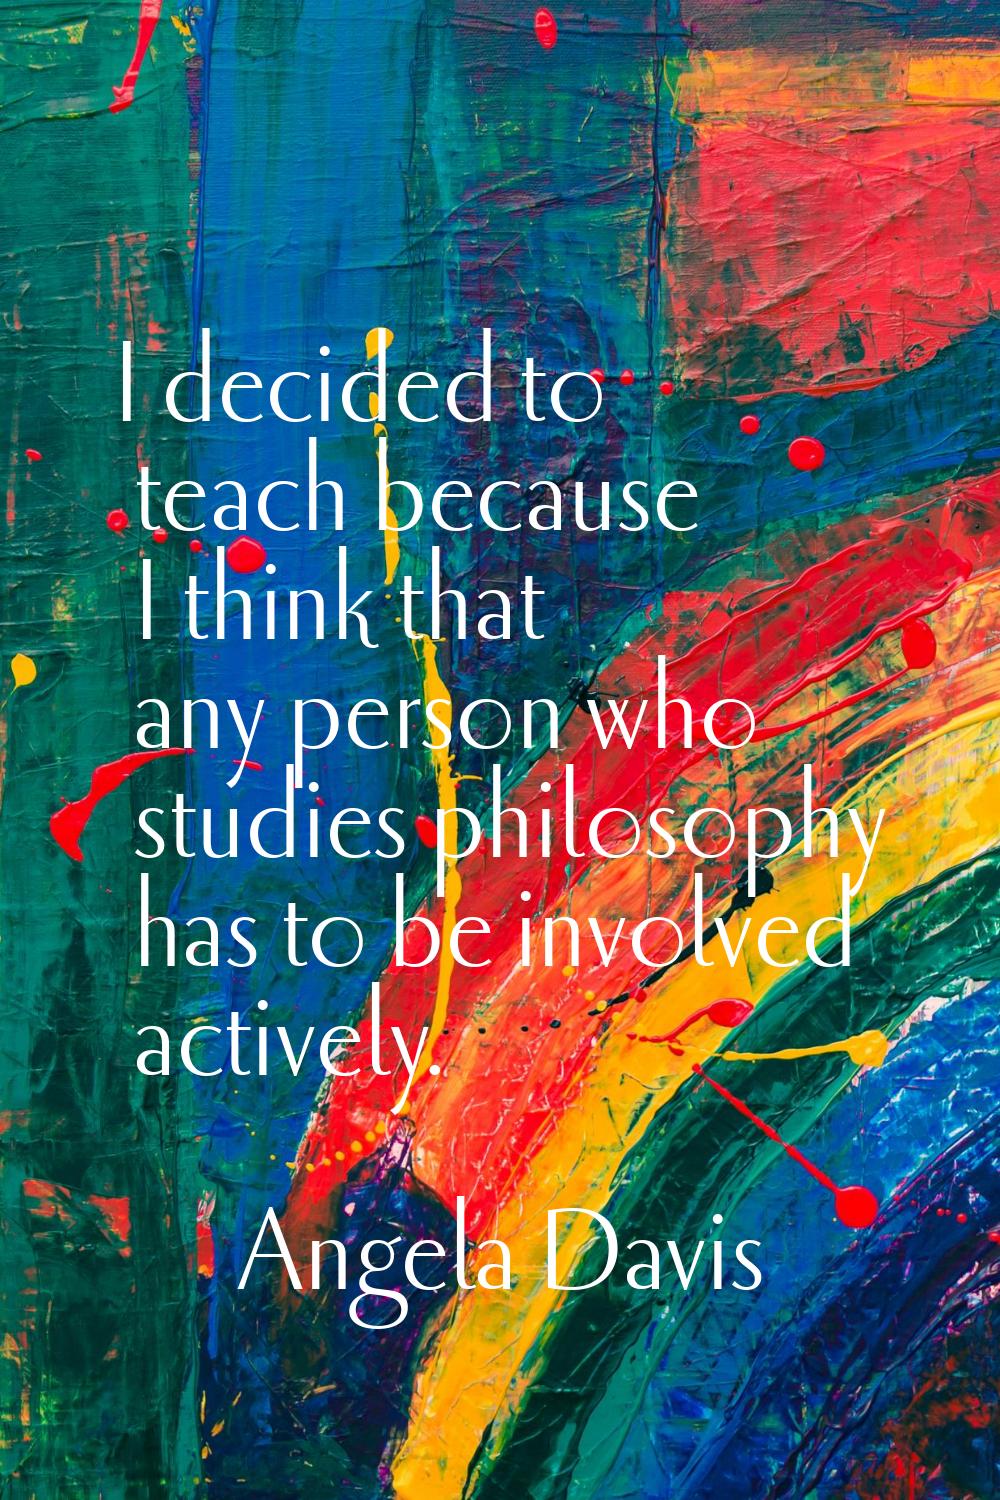 I decided to teach because I think that any person who studies philosophy has to be involved active